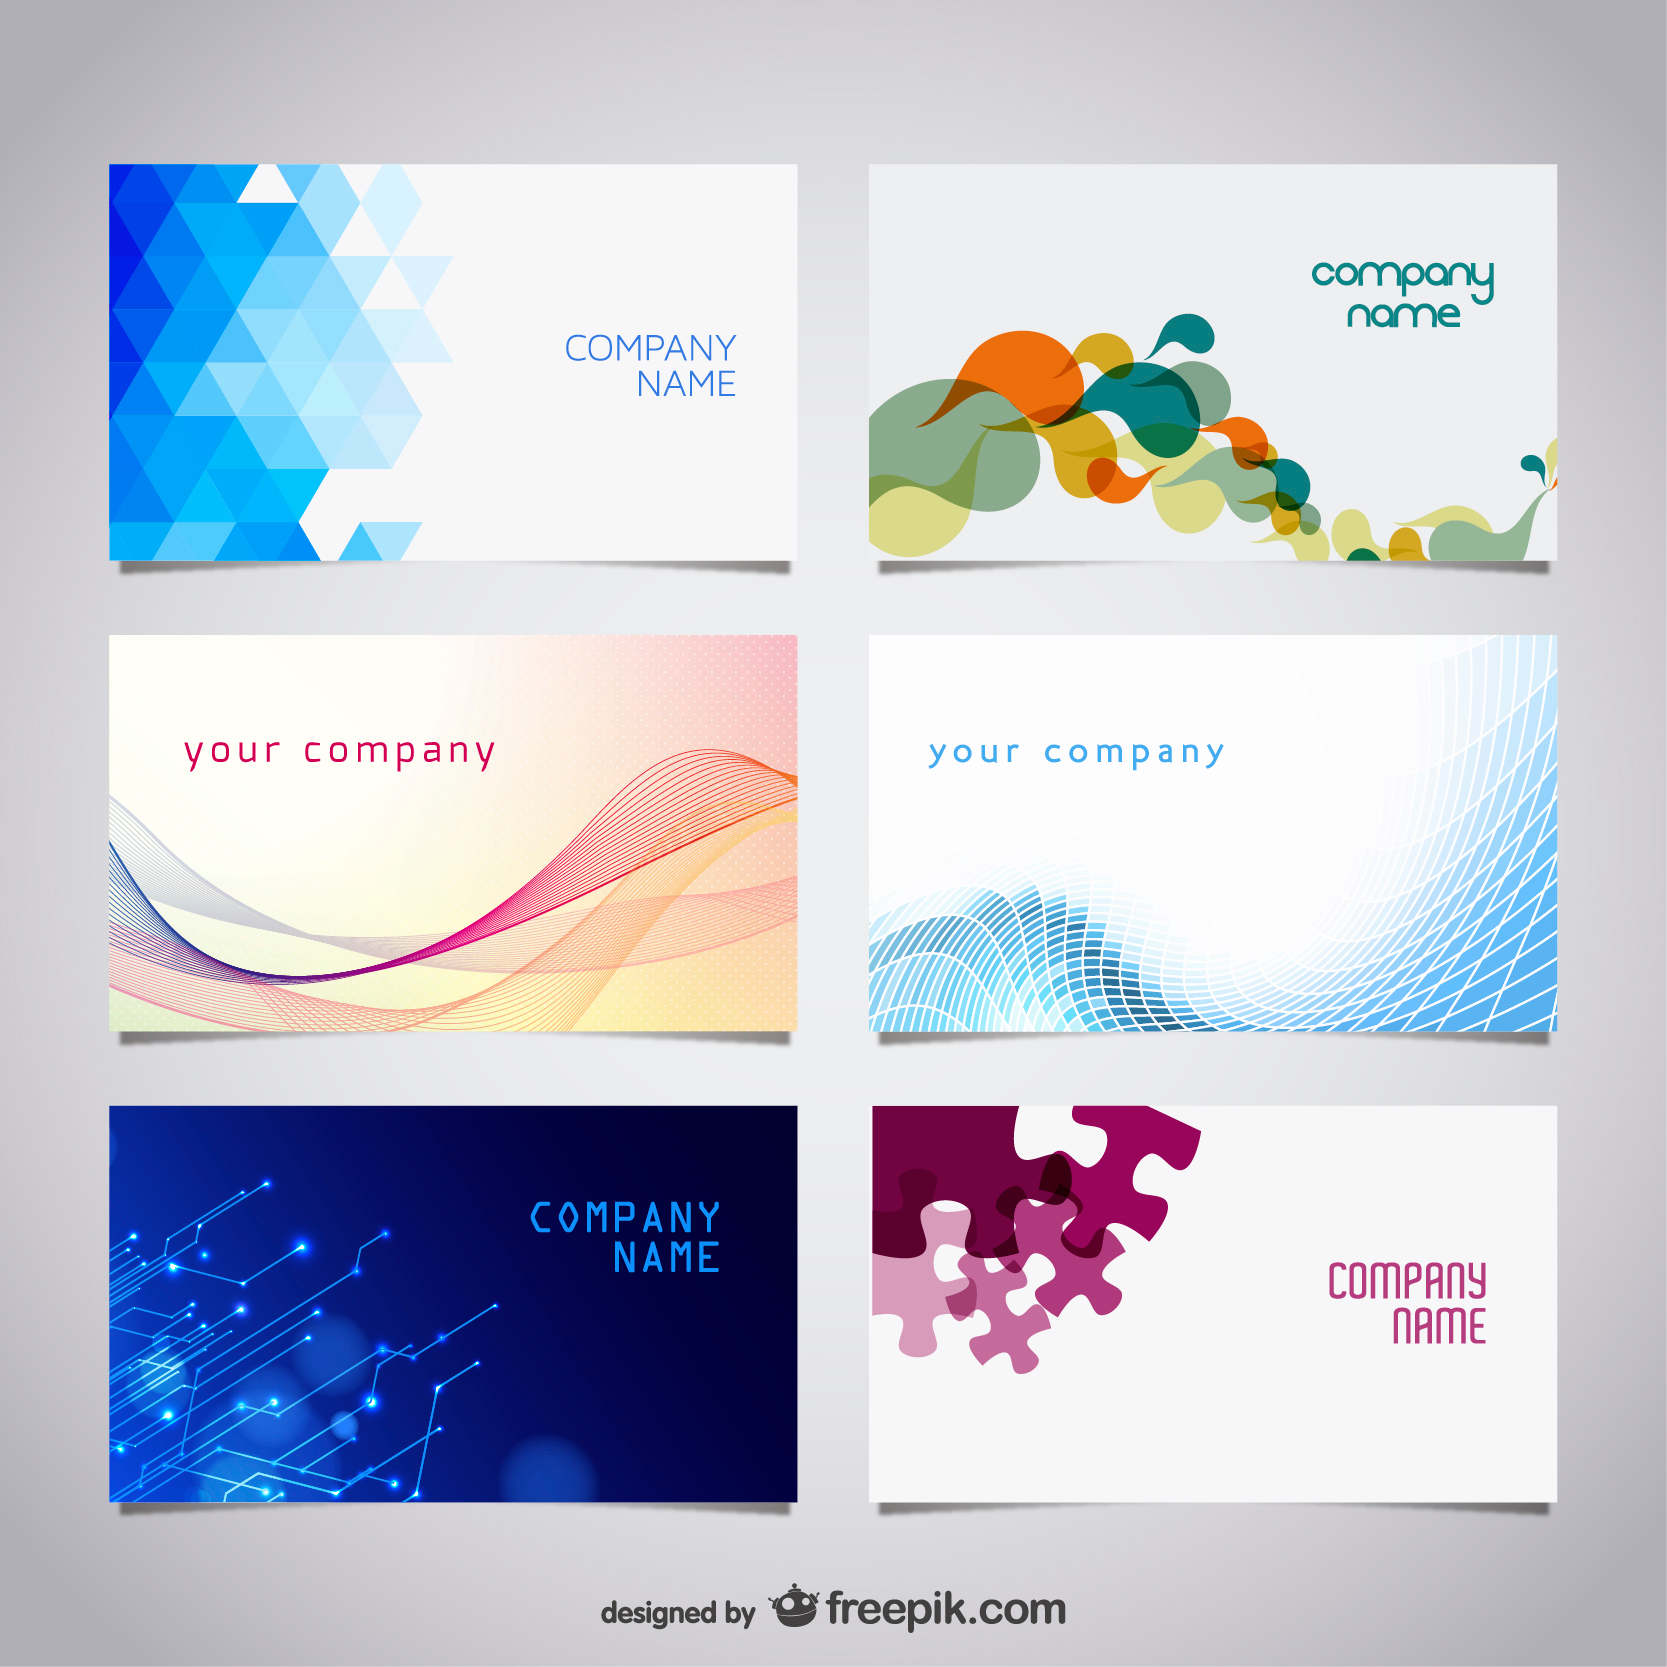 Free Download Ai Vector Files